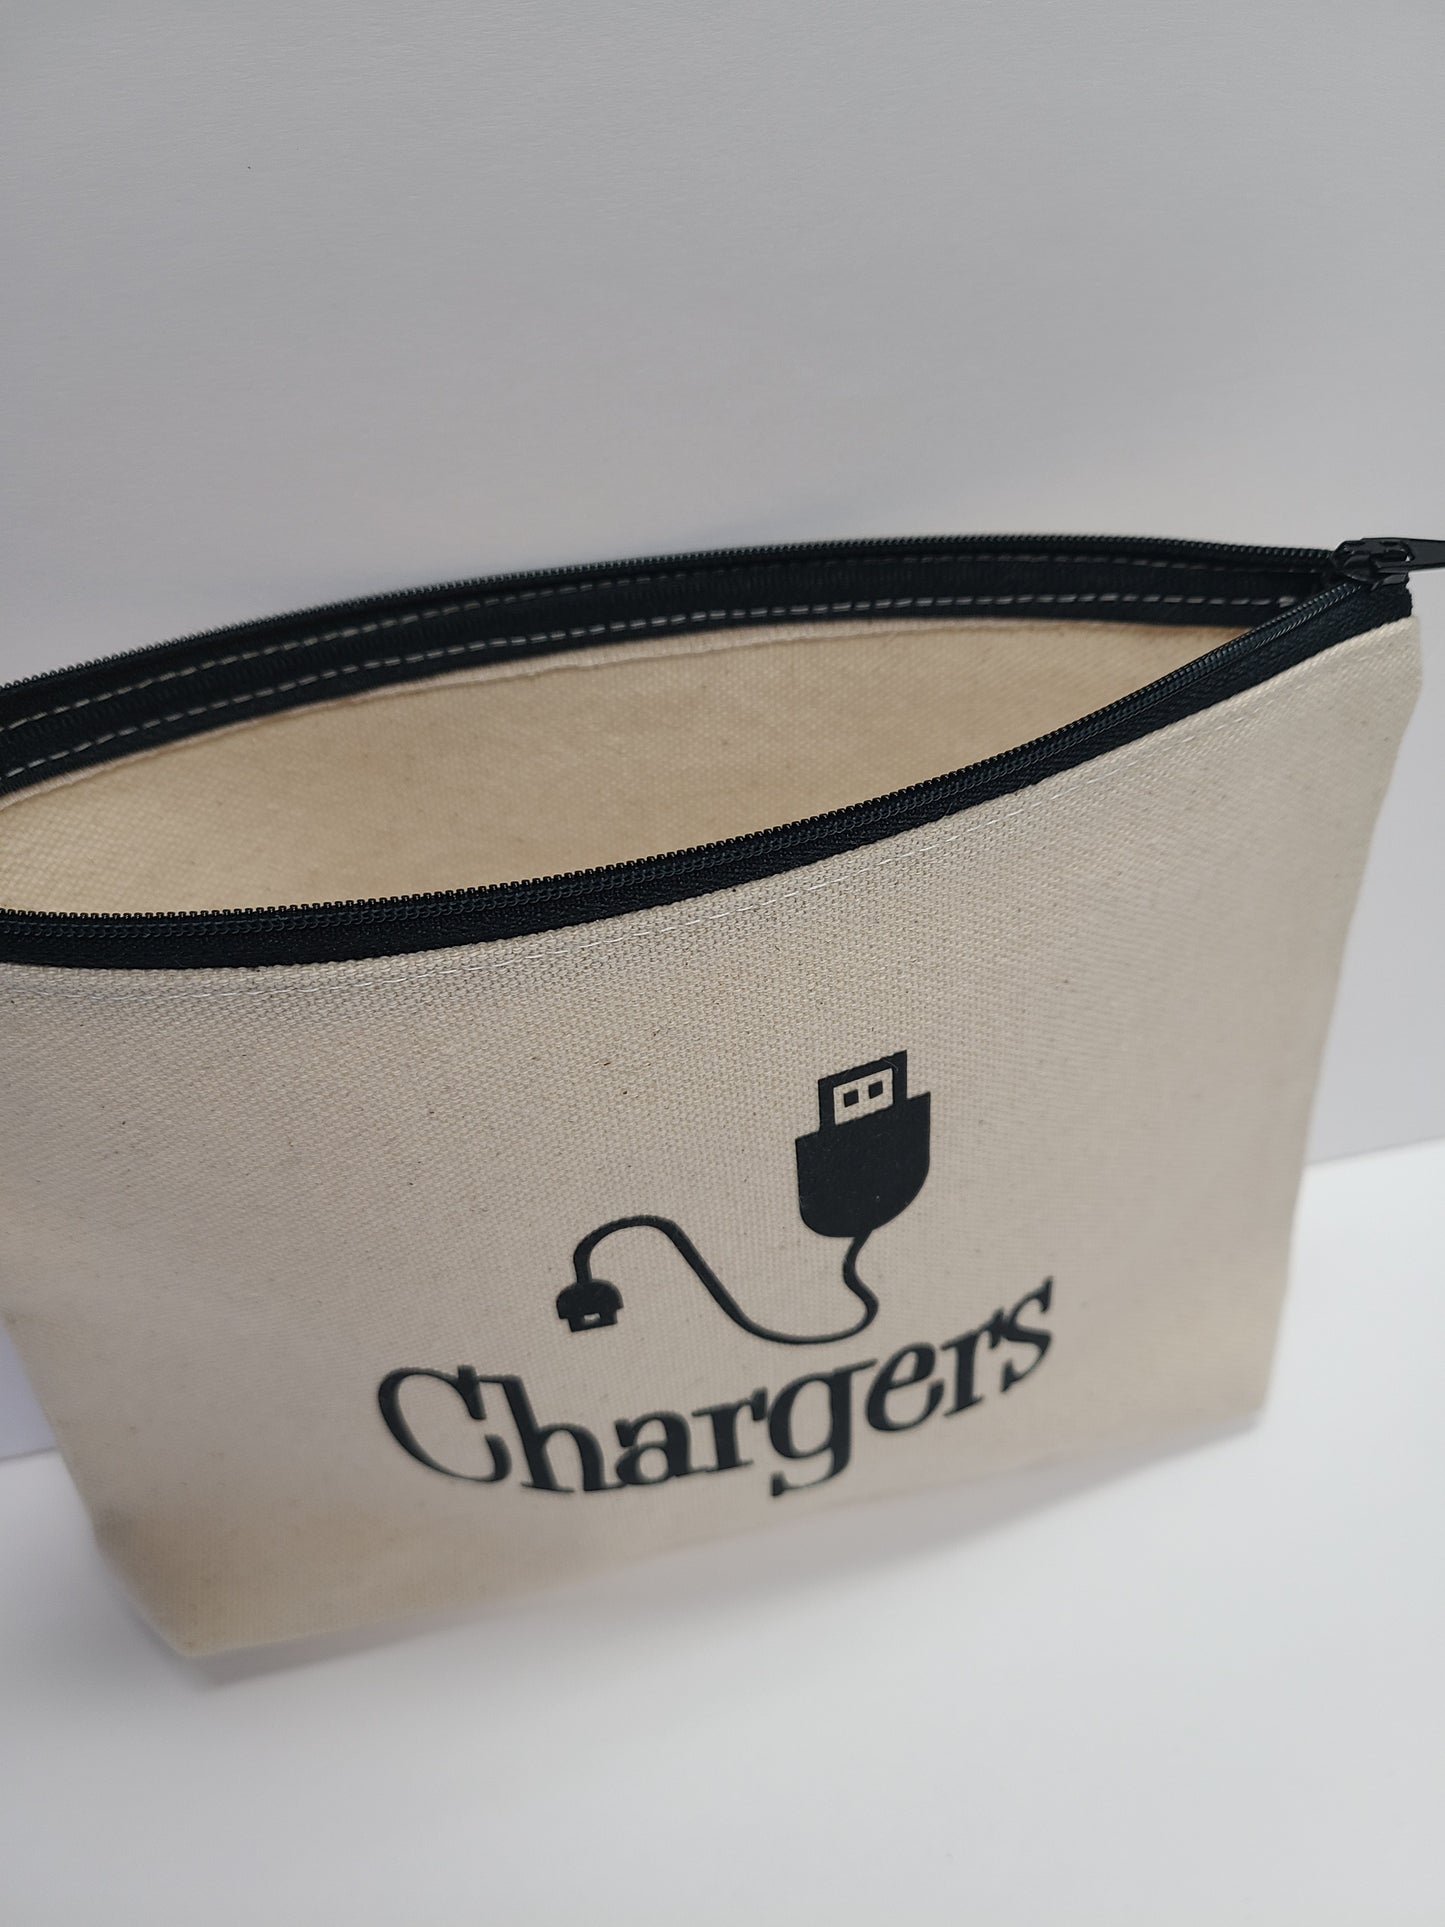 Chargers small Travel Bag